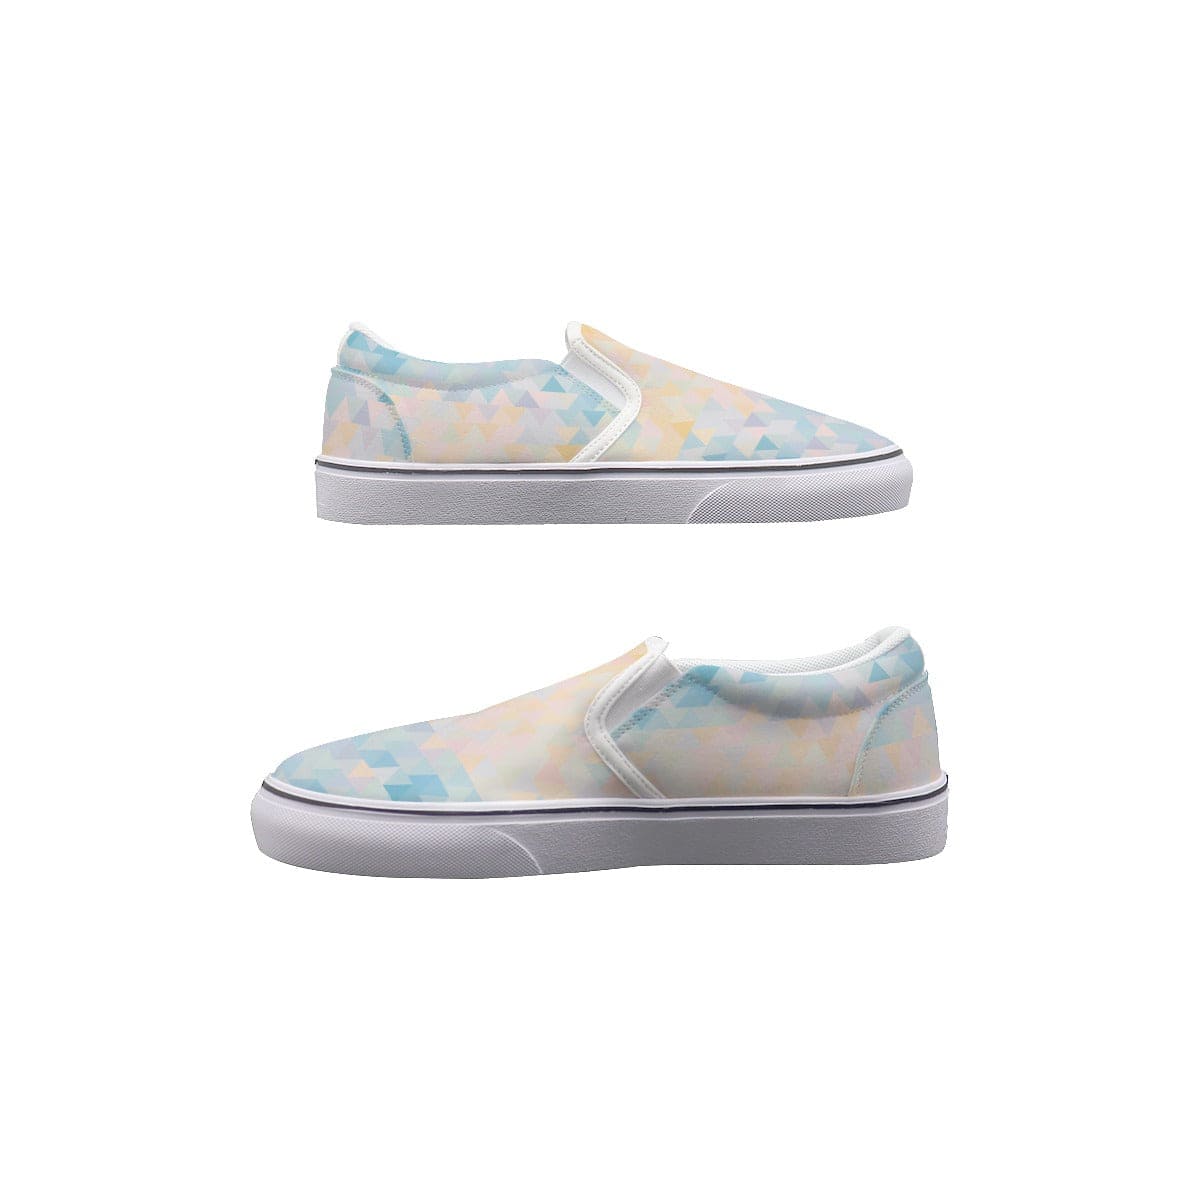 Yoycol Iced Prisms - Women's Slip On Sneakers